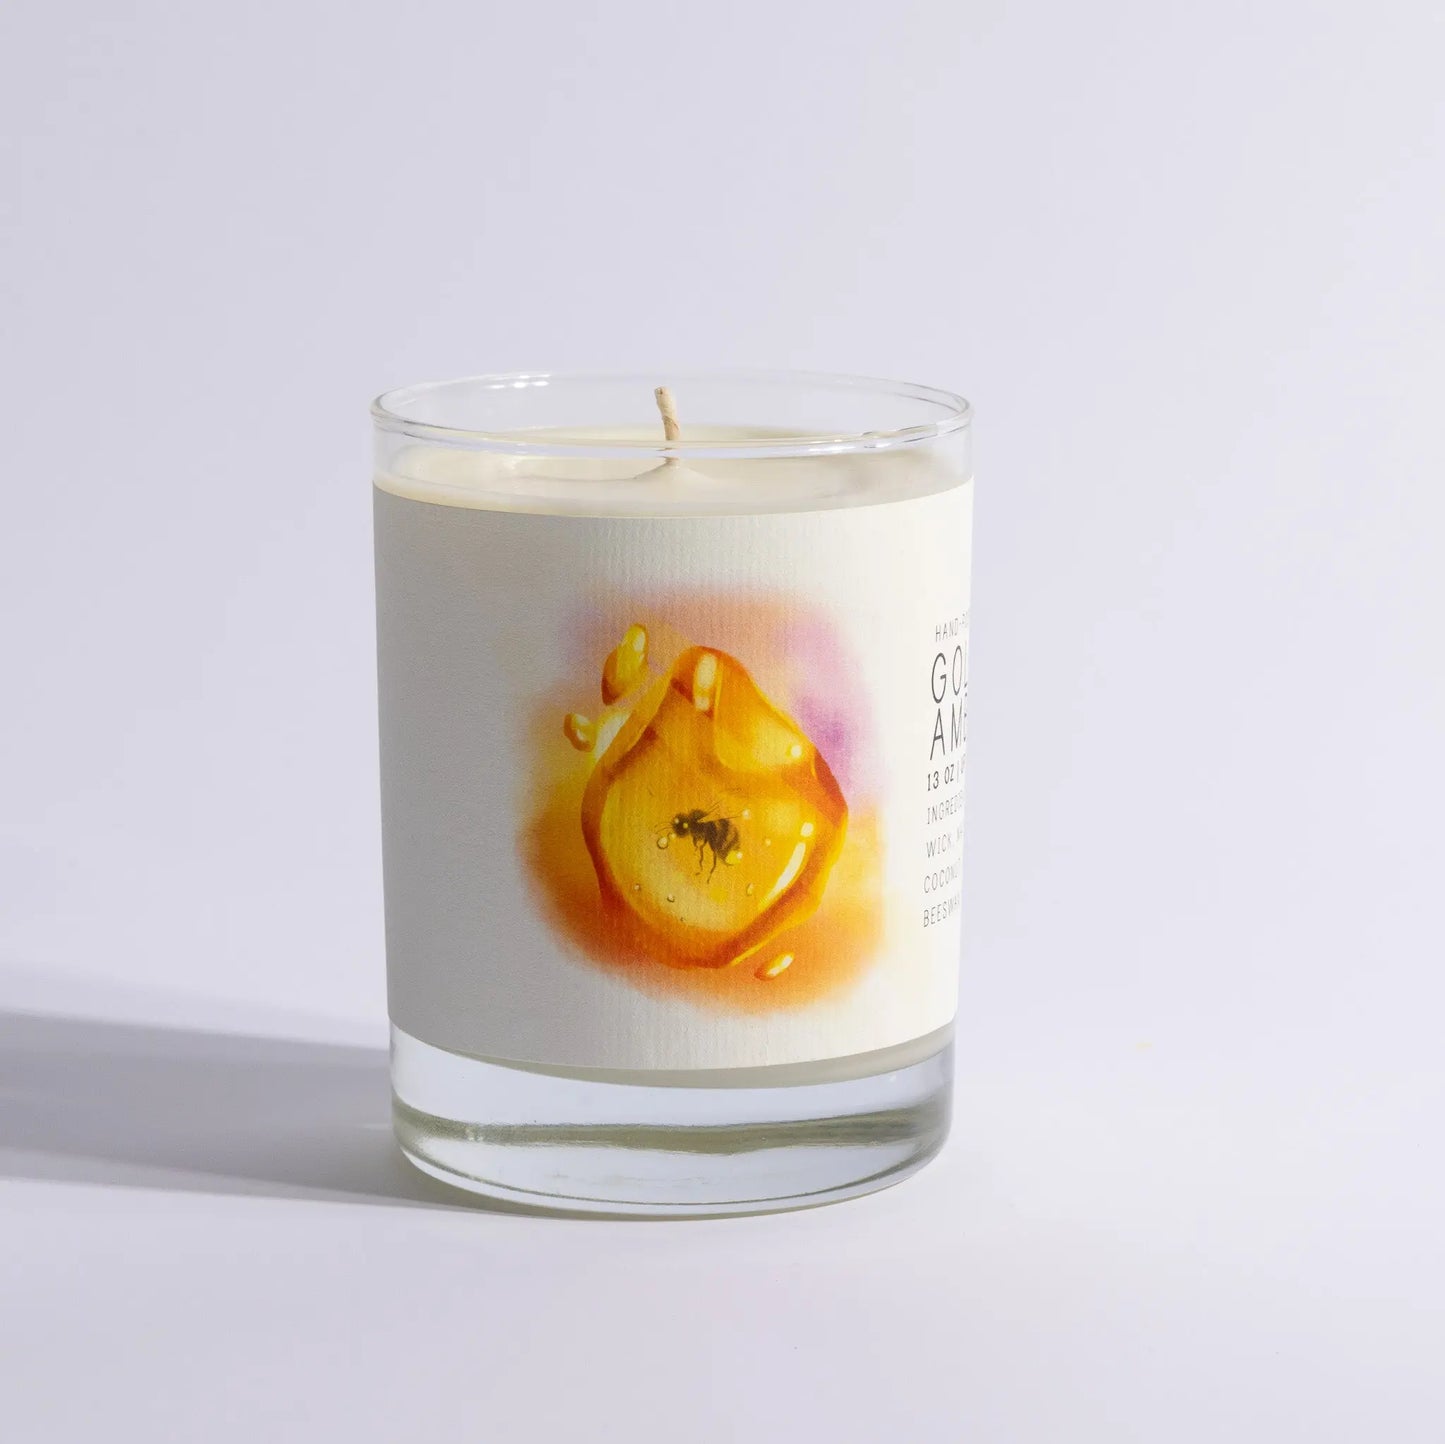 Golden Amber- Just Bee Candles Just Bee Cosmetics